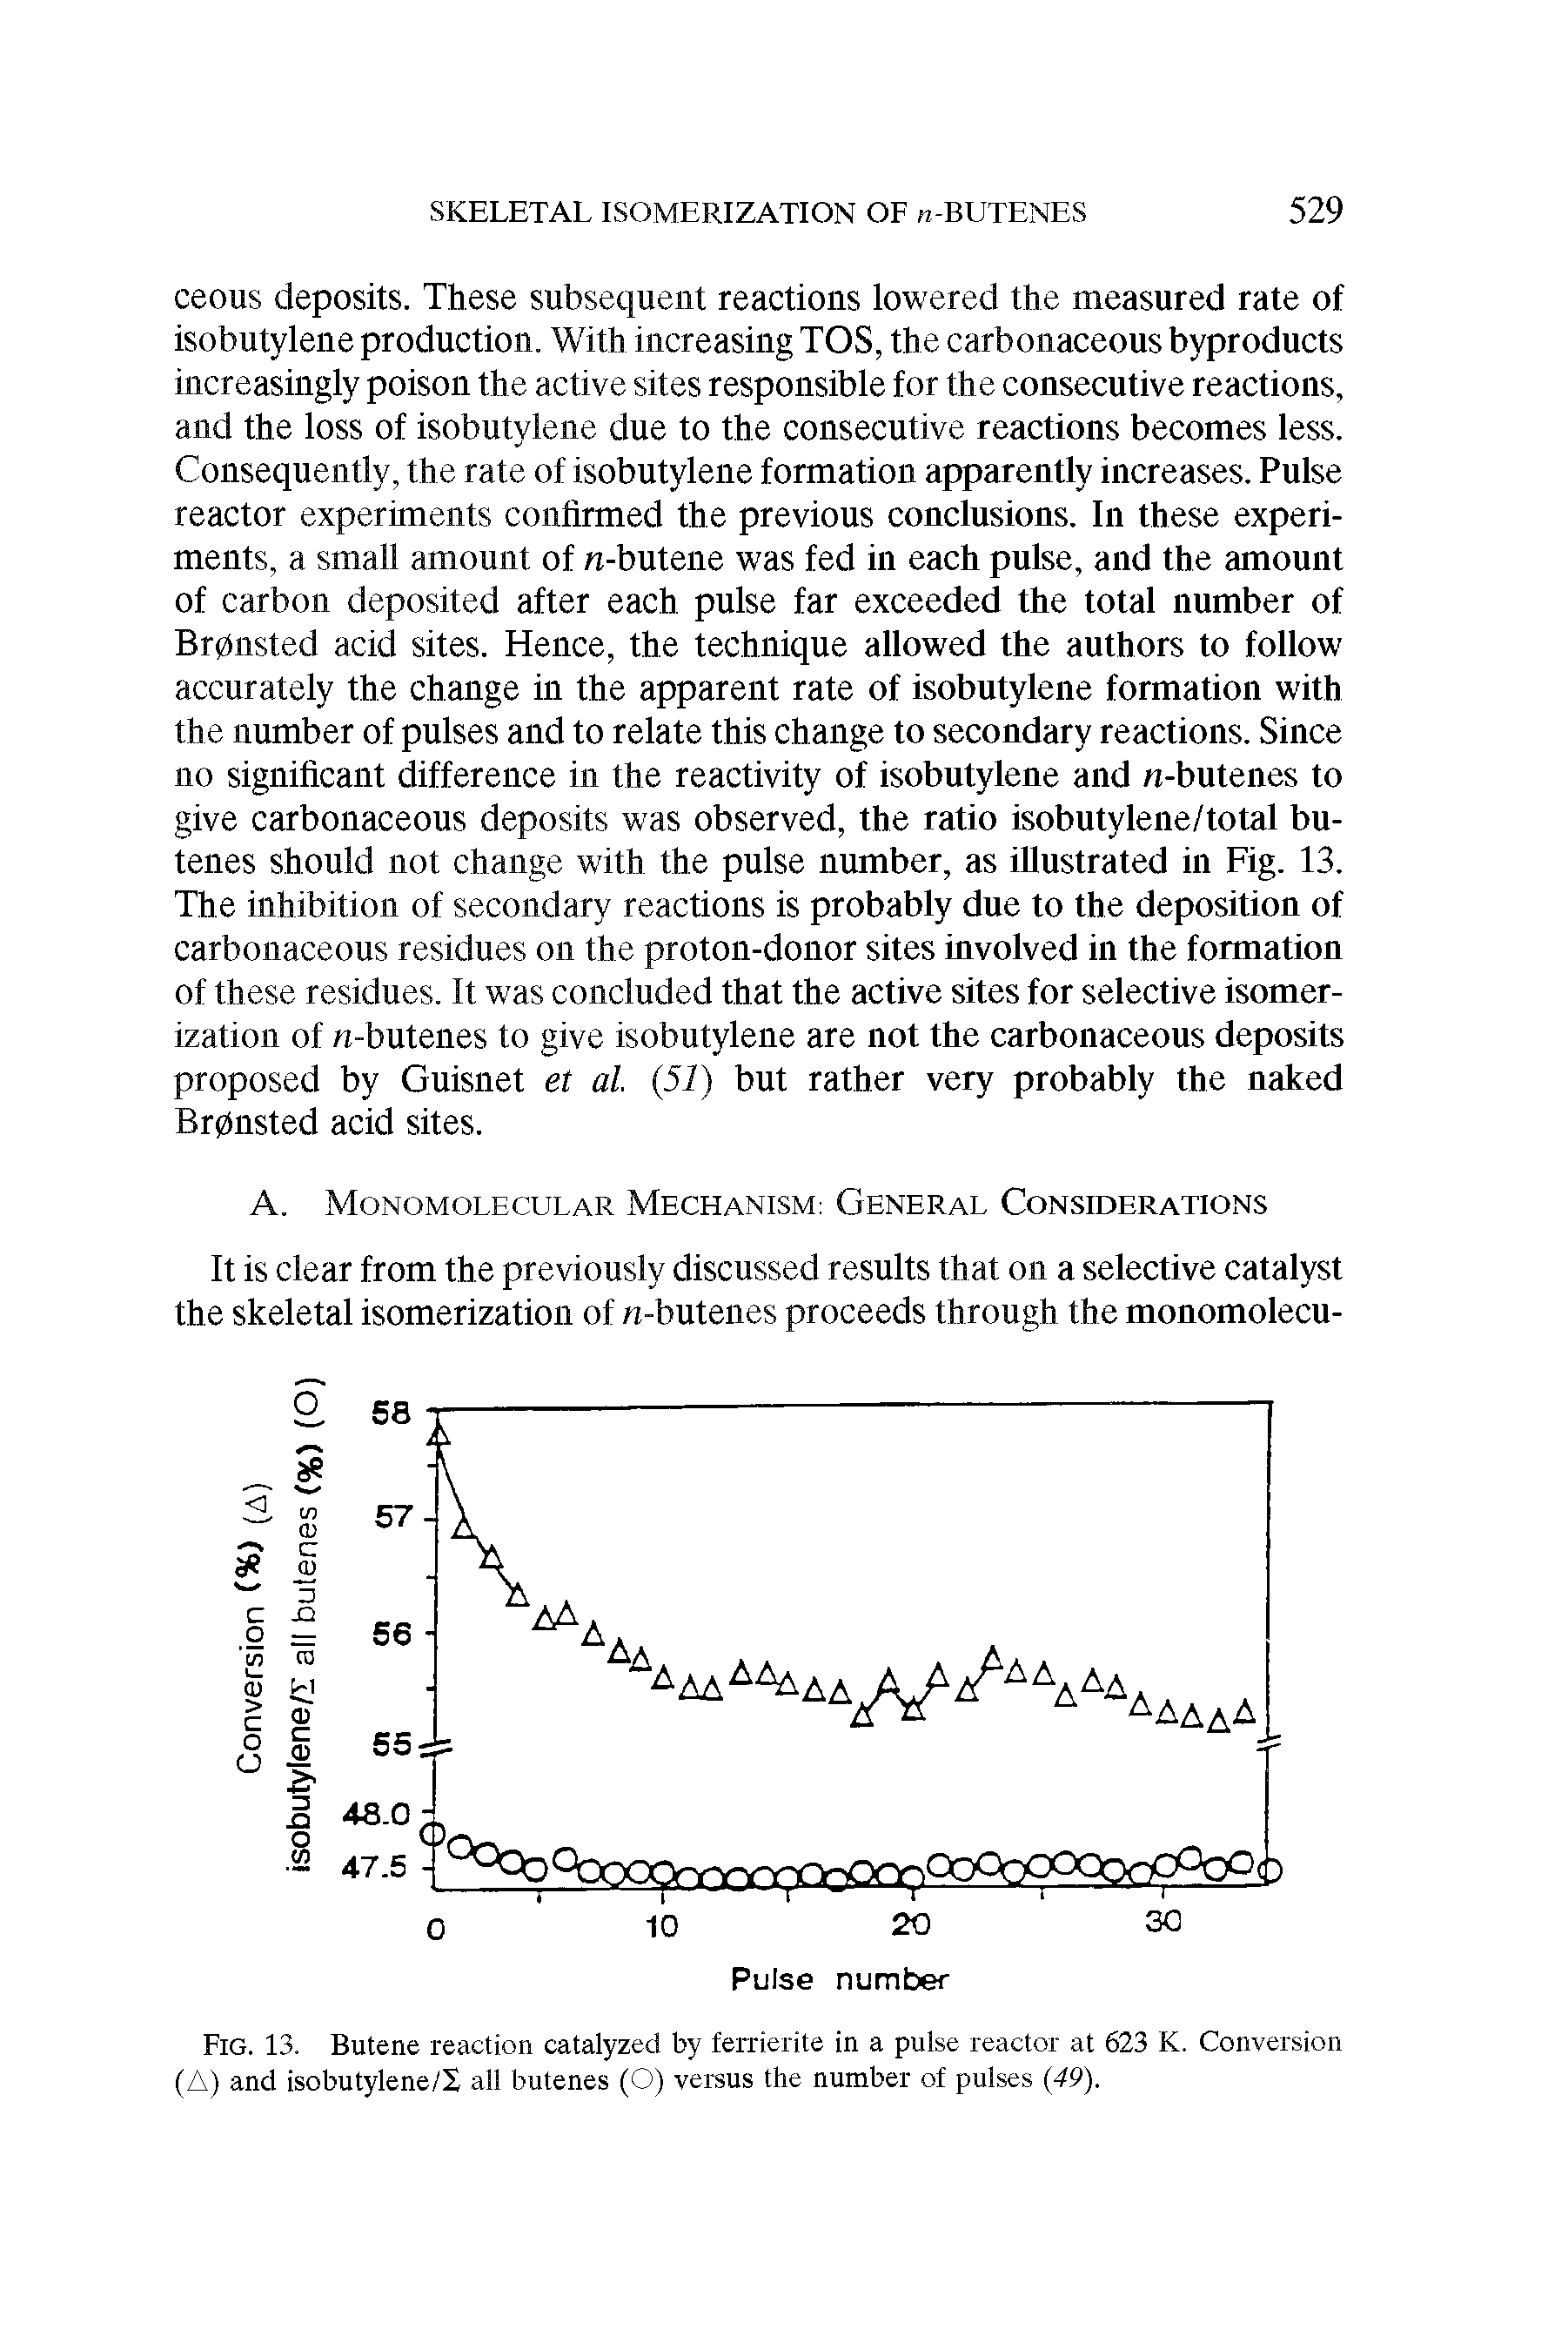 Fig. 13. Butene reaction catalyzed by ferrierite in a pulse reactor at 623 K. Conversion (A) and isobutylene/X all butenes (O) versus the number of pulses (49).